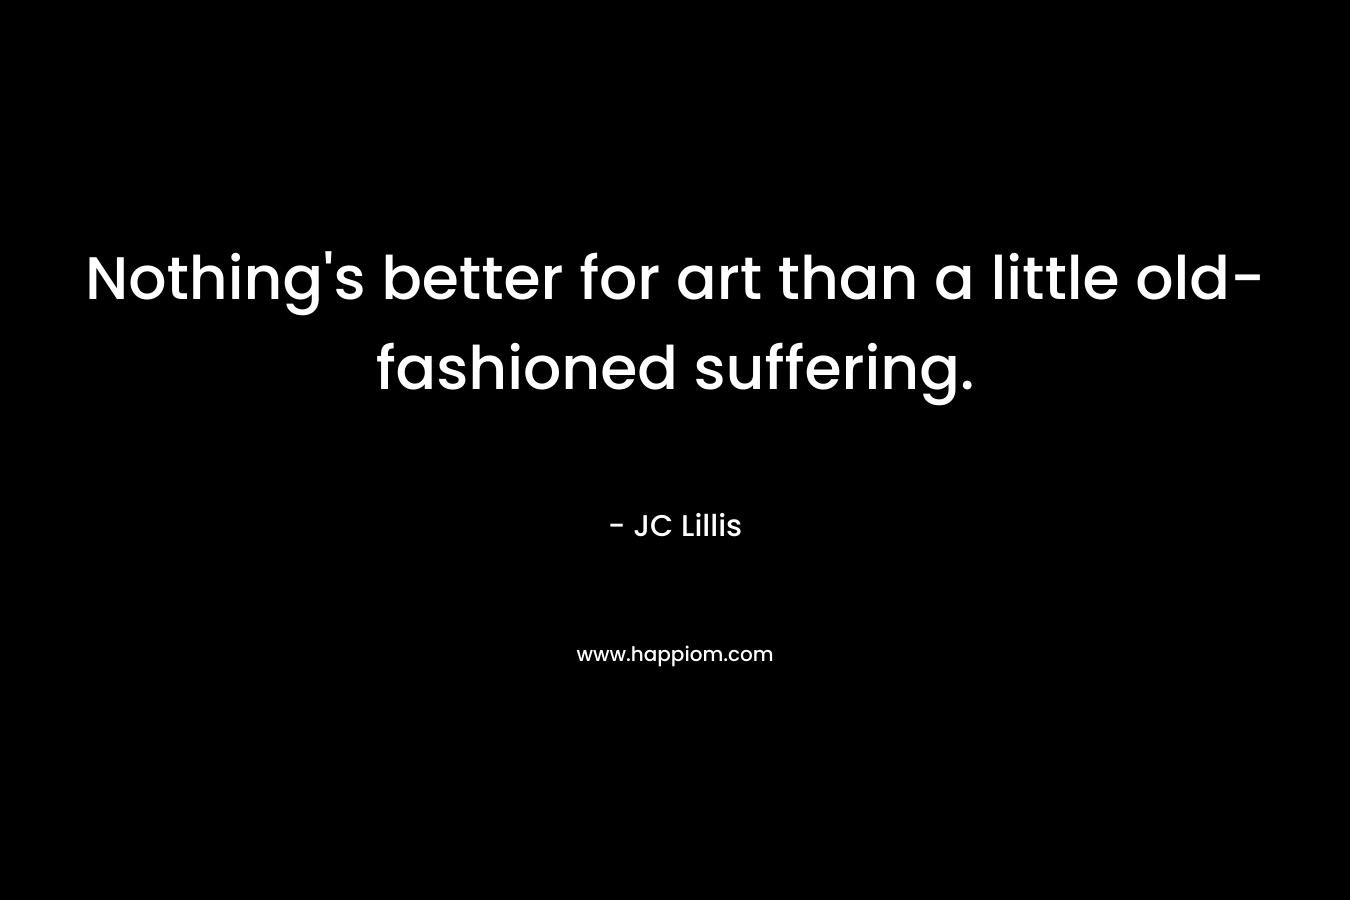 Nothing’s better for art than a little old-fashioned suffering. – JC Lillis